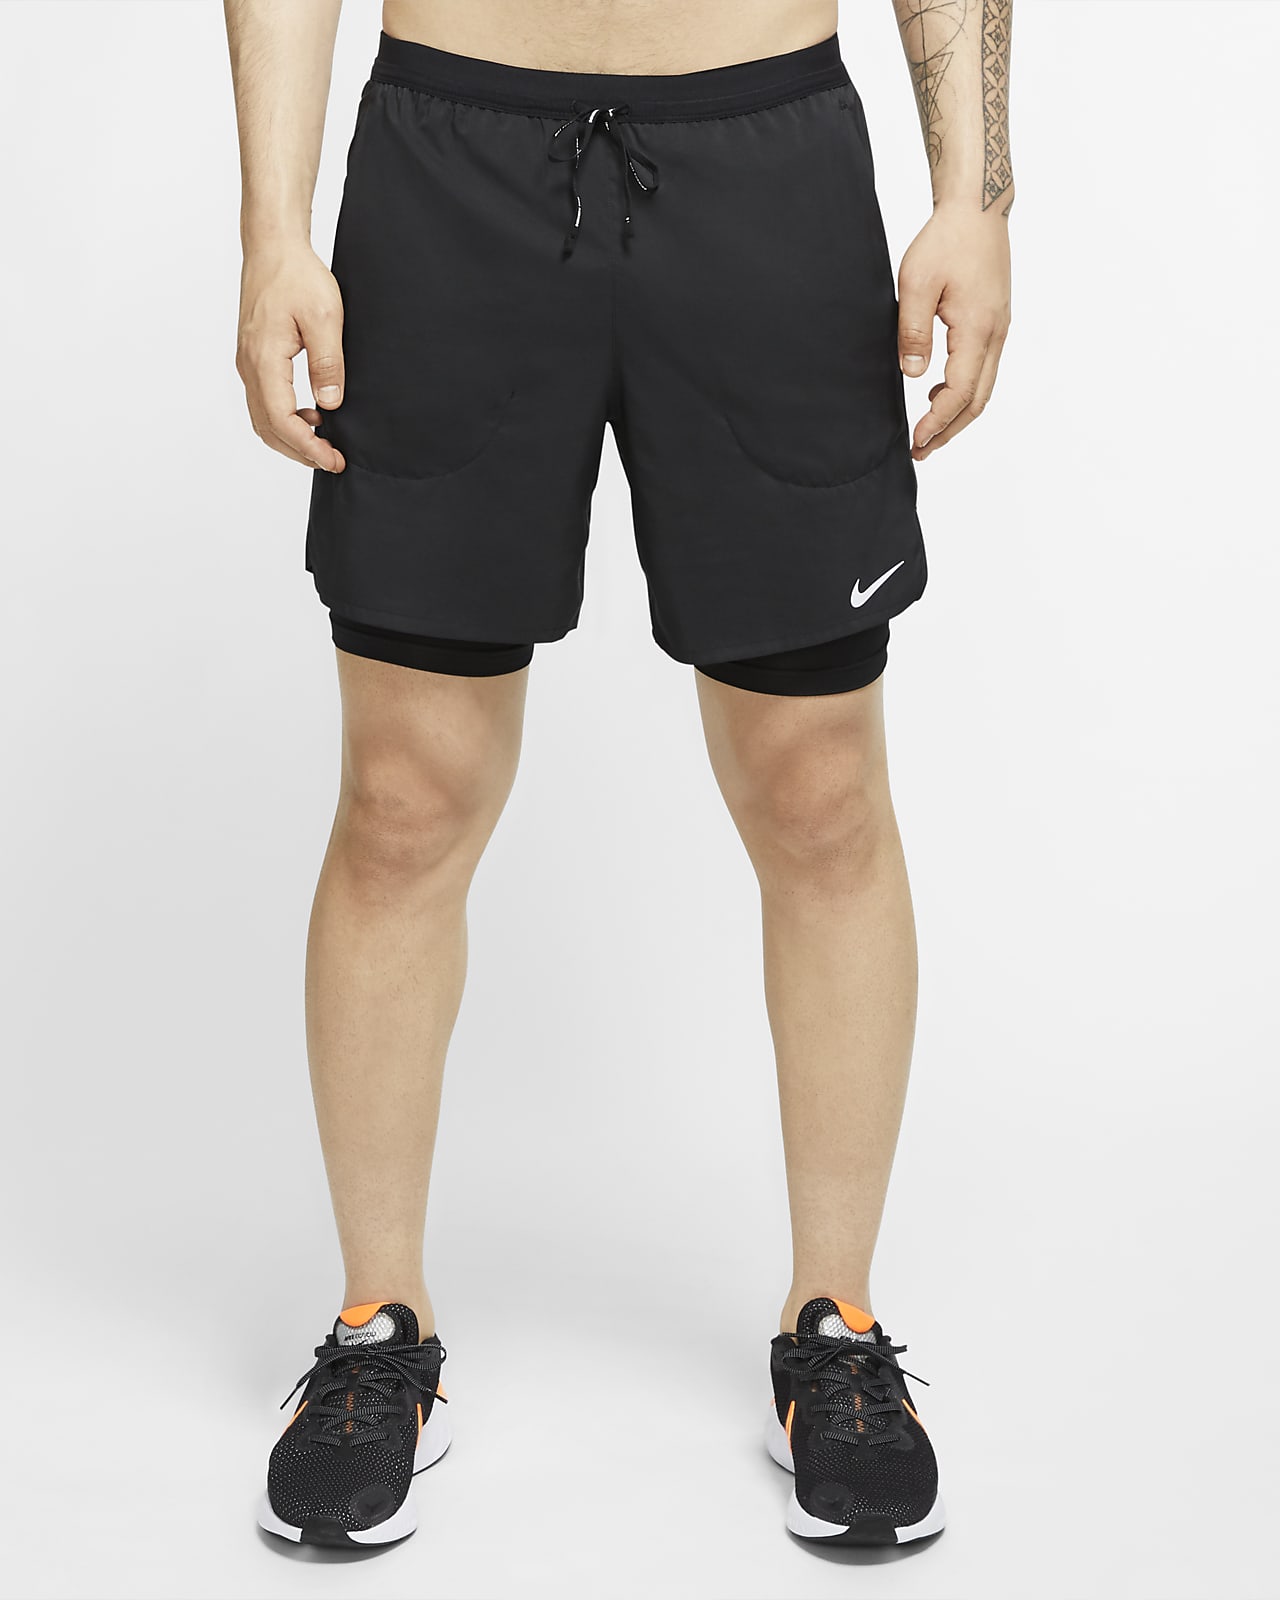 nike 2 in one running shorts